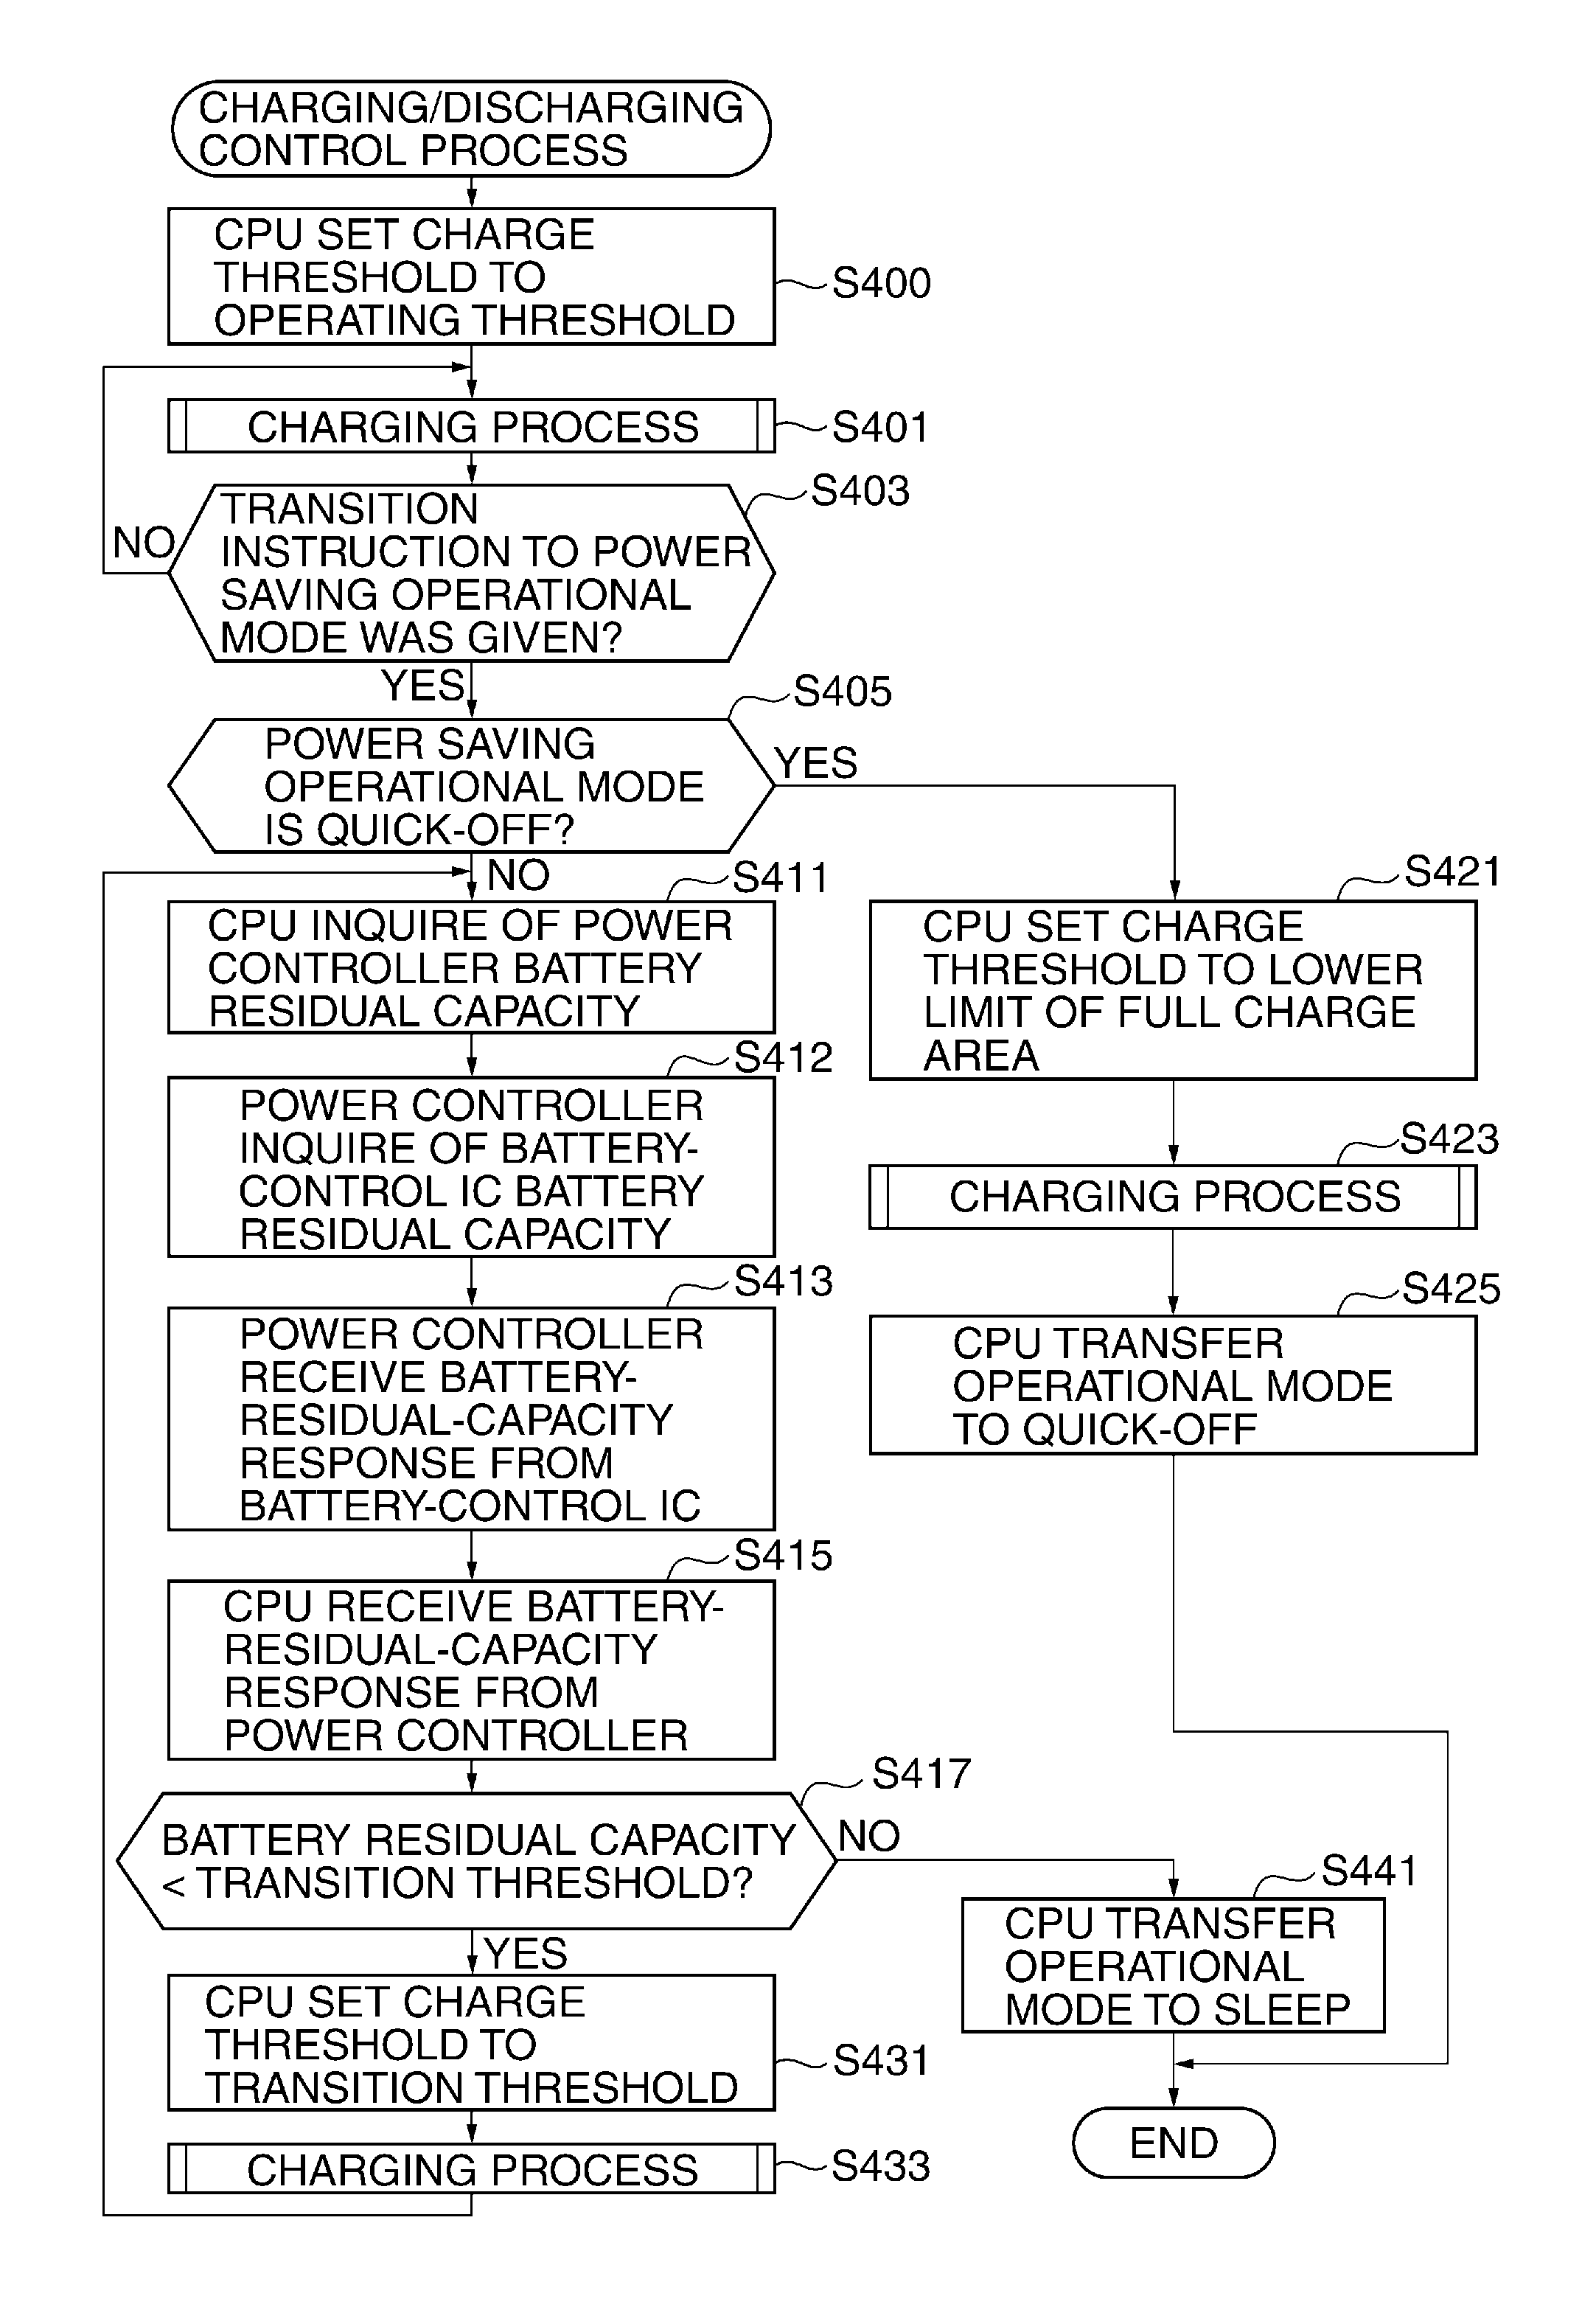 Method and system for ensuring a residual battery capacity reaching a predetermined value before transitioning apparatus to power-saving mode